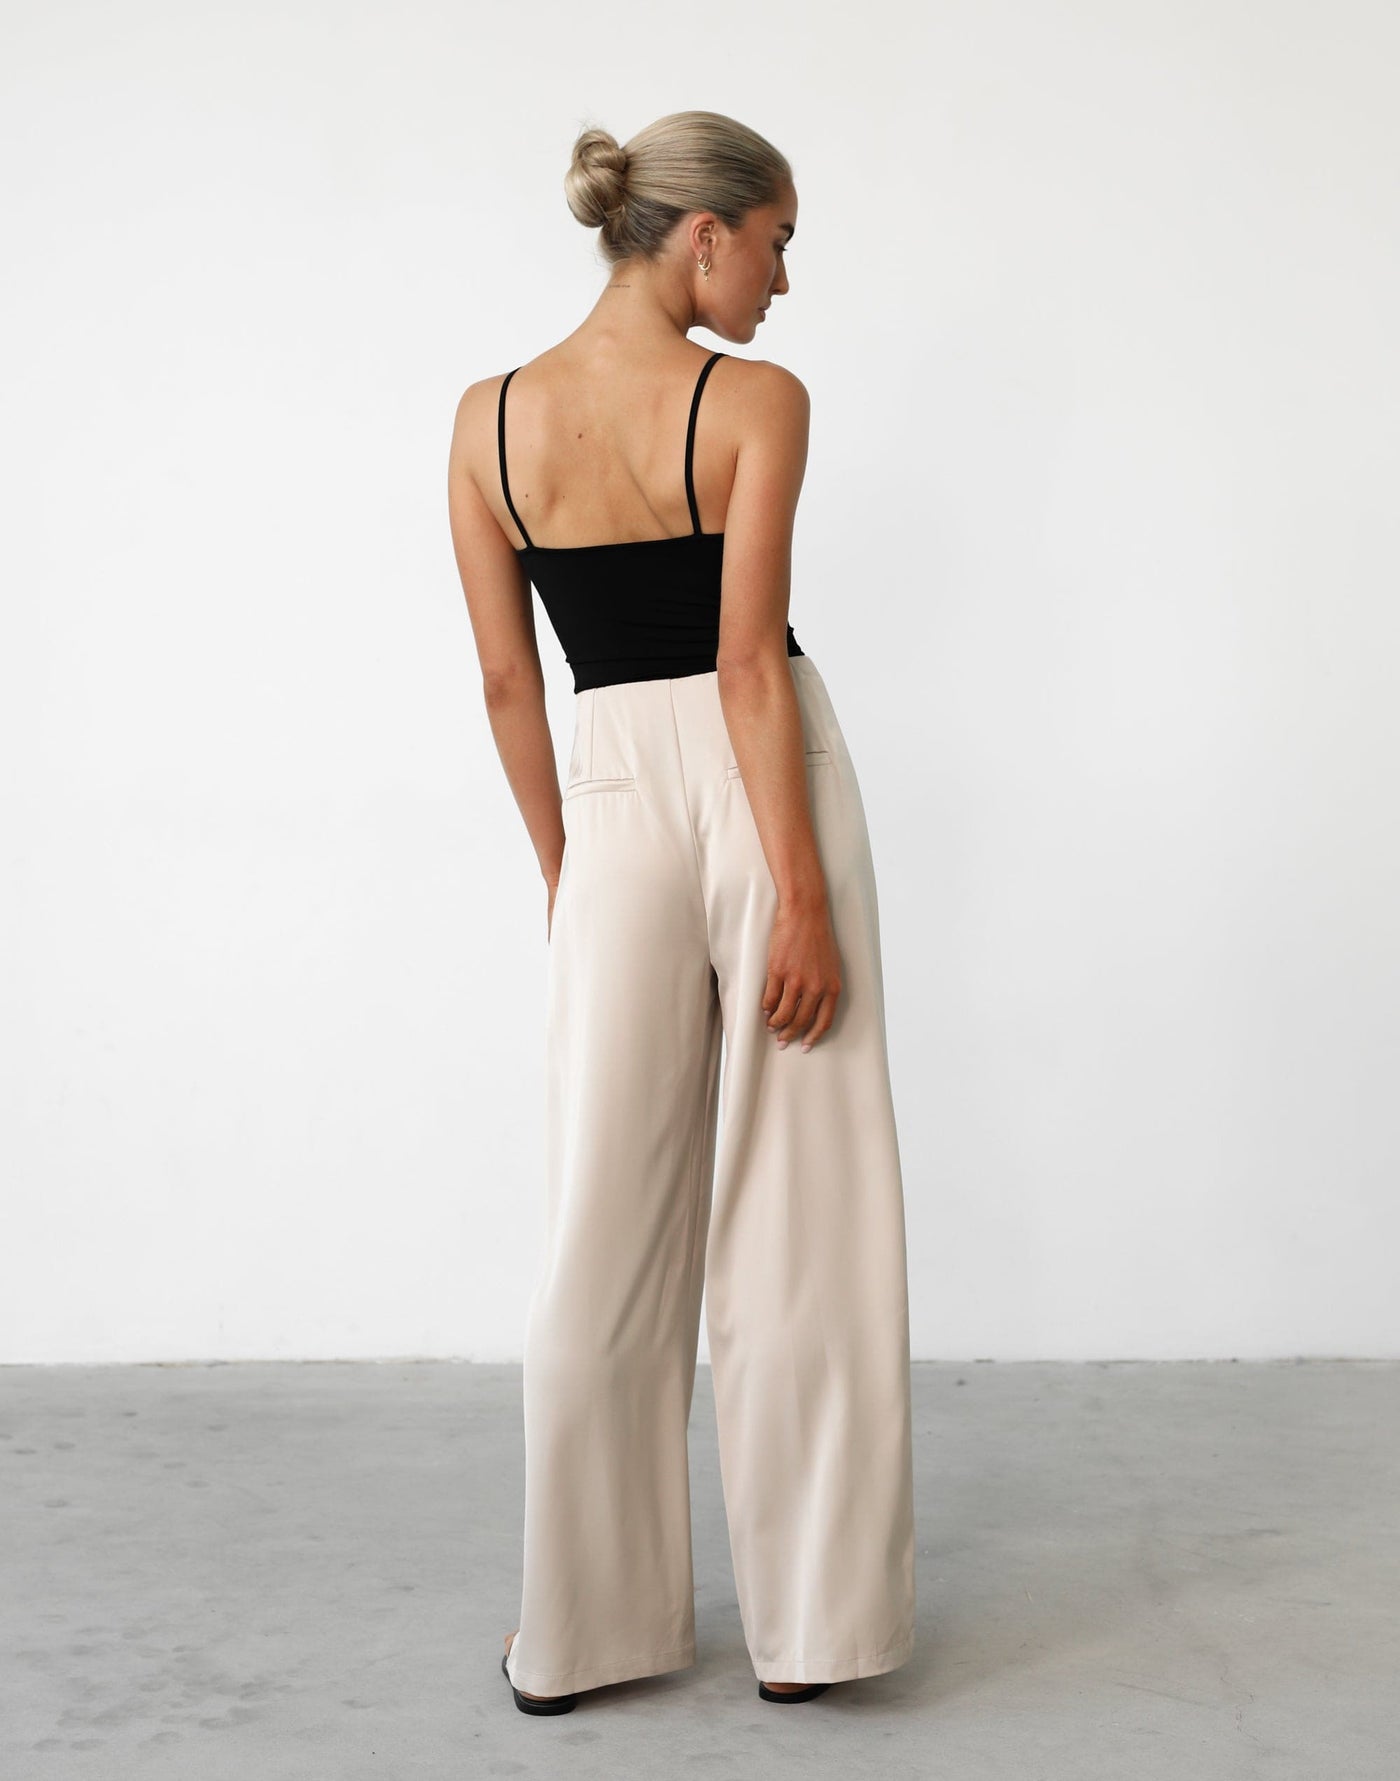 Yzabelle Pants (Beige) - Satin High Waisted Wide Leg Pant - Women's Pants - Charcoal Clothing